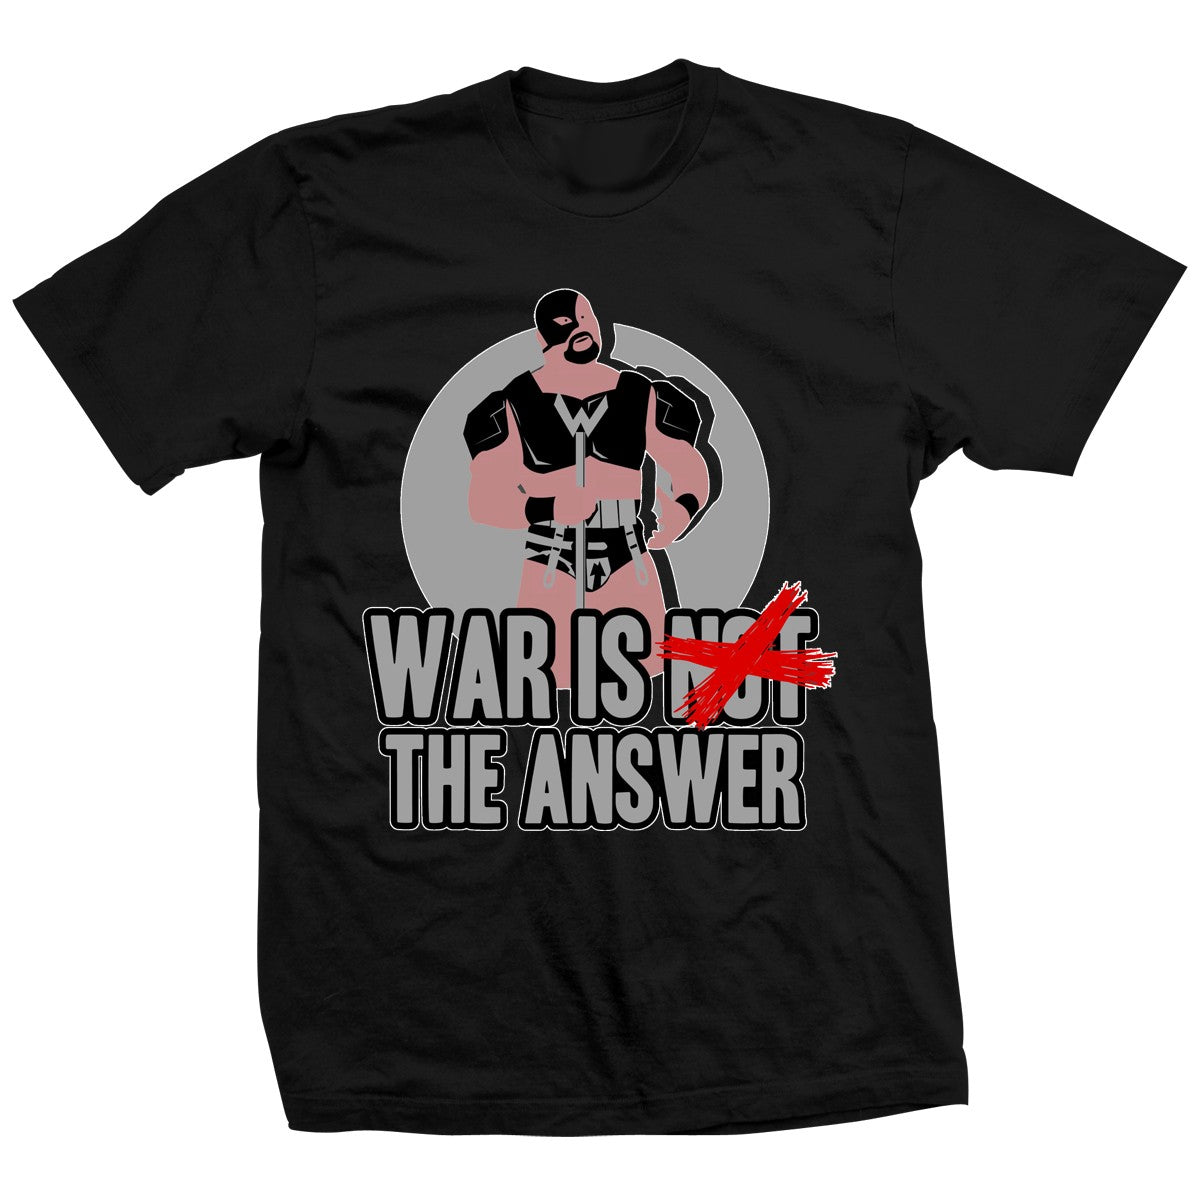 Warlord War Is The Anwser T-Shirt